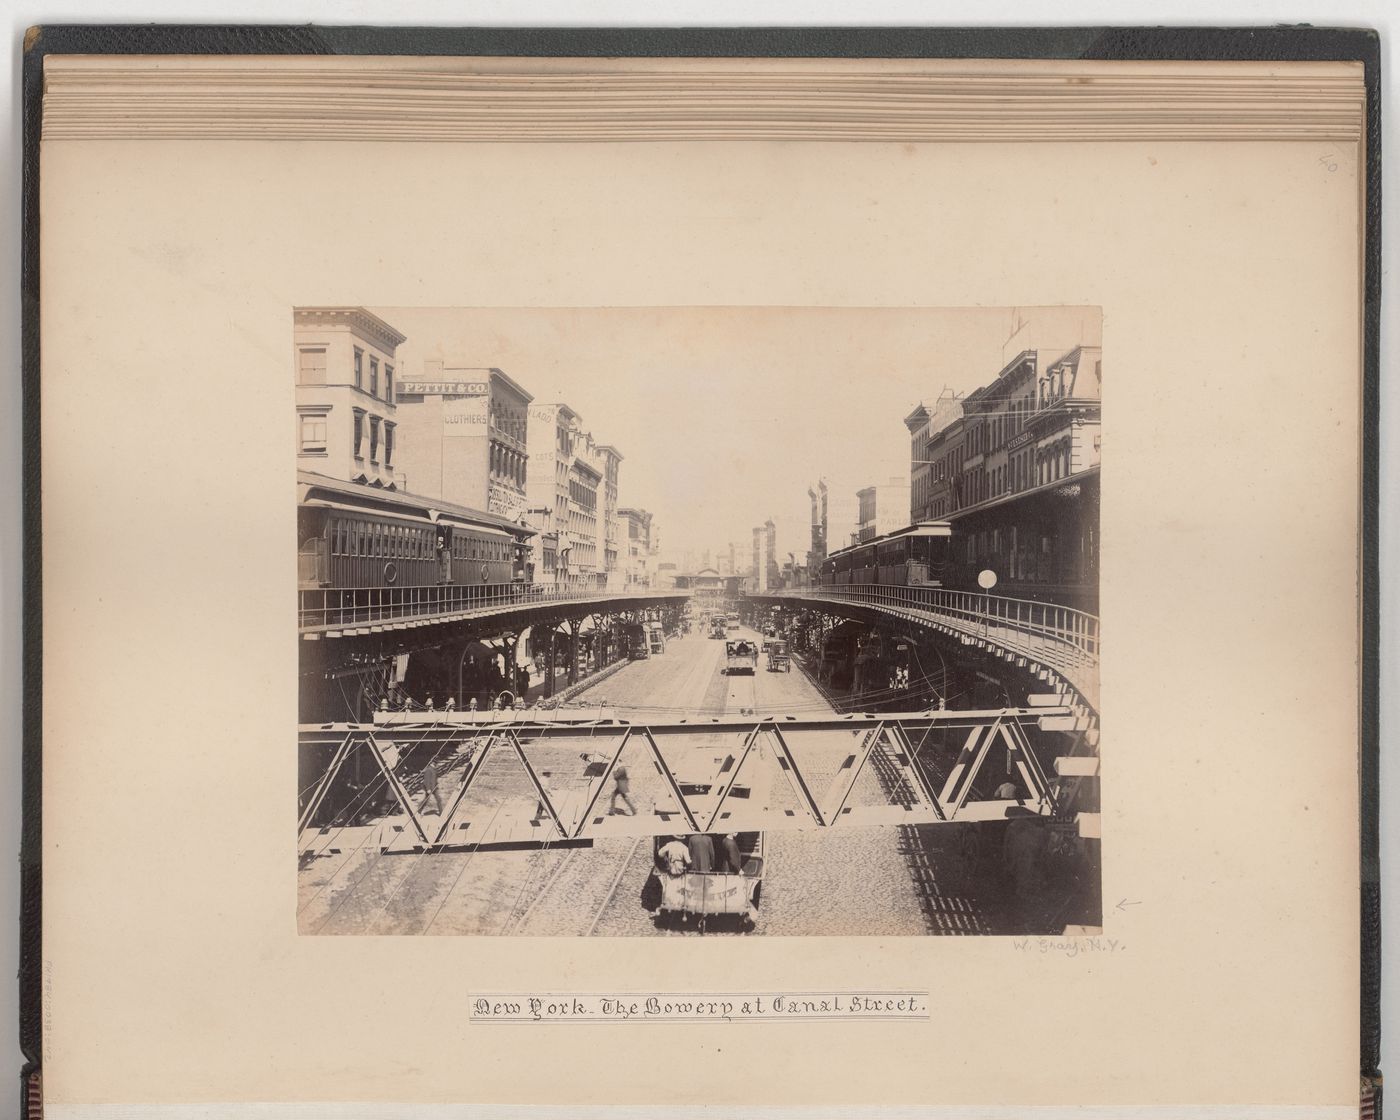 View of elevated trains at The Bowery [street] from Canal Street, New York City, New York